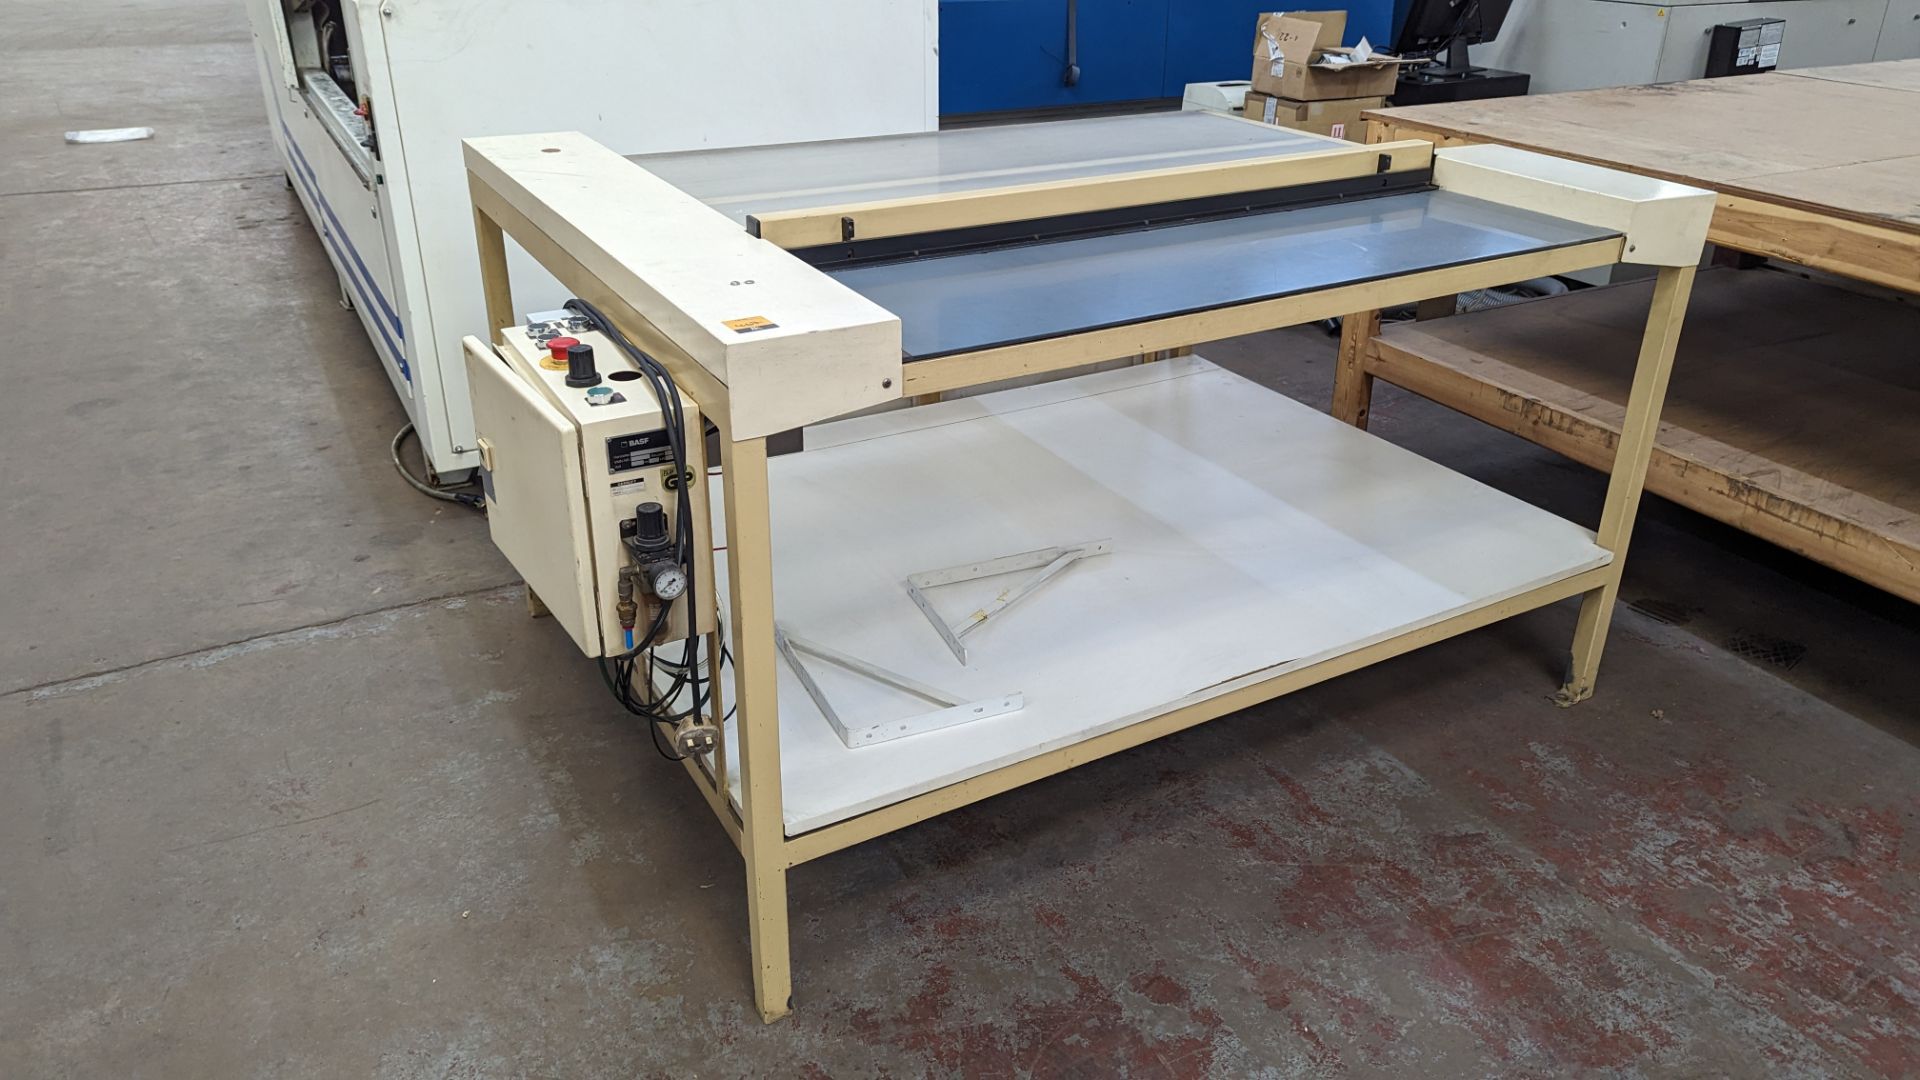 Plate cutting table with built-in clamping